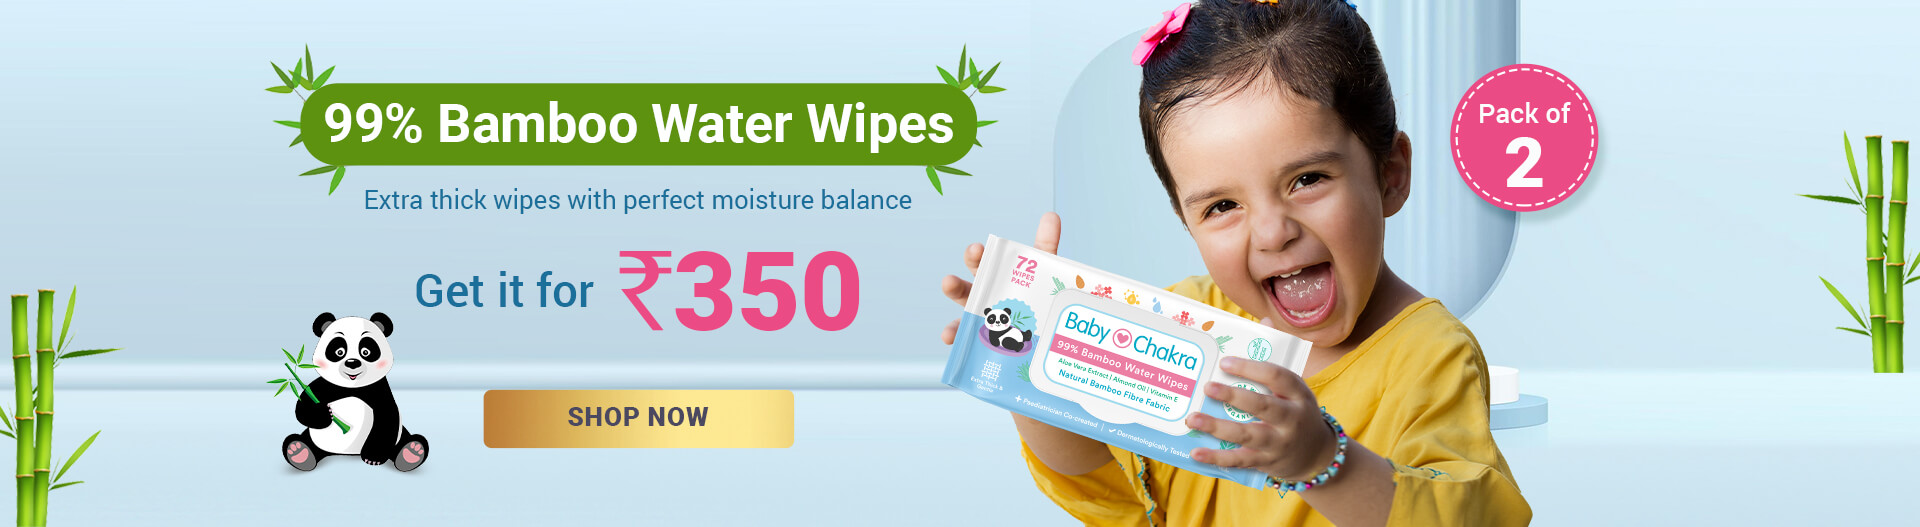 Pack of 2 Water Wipes